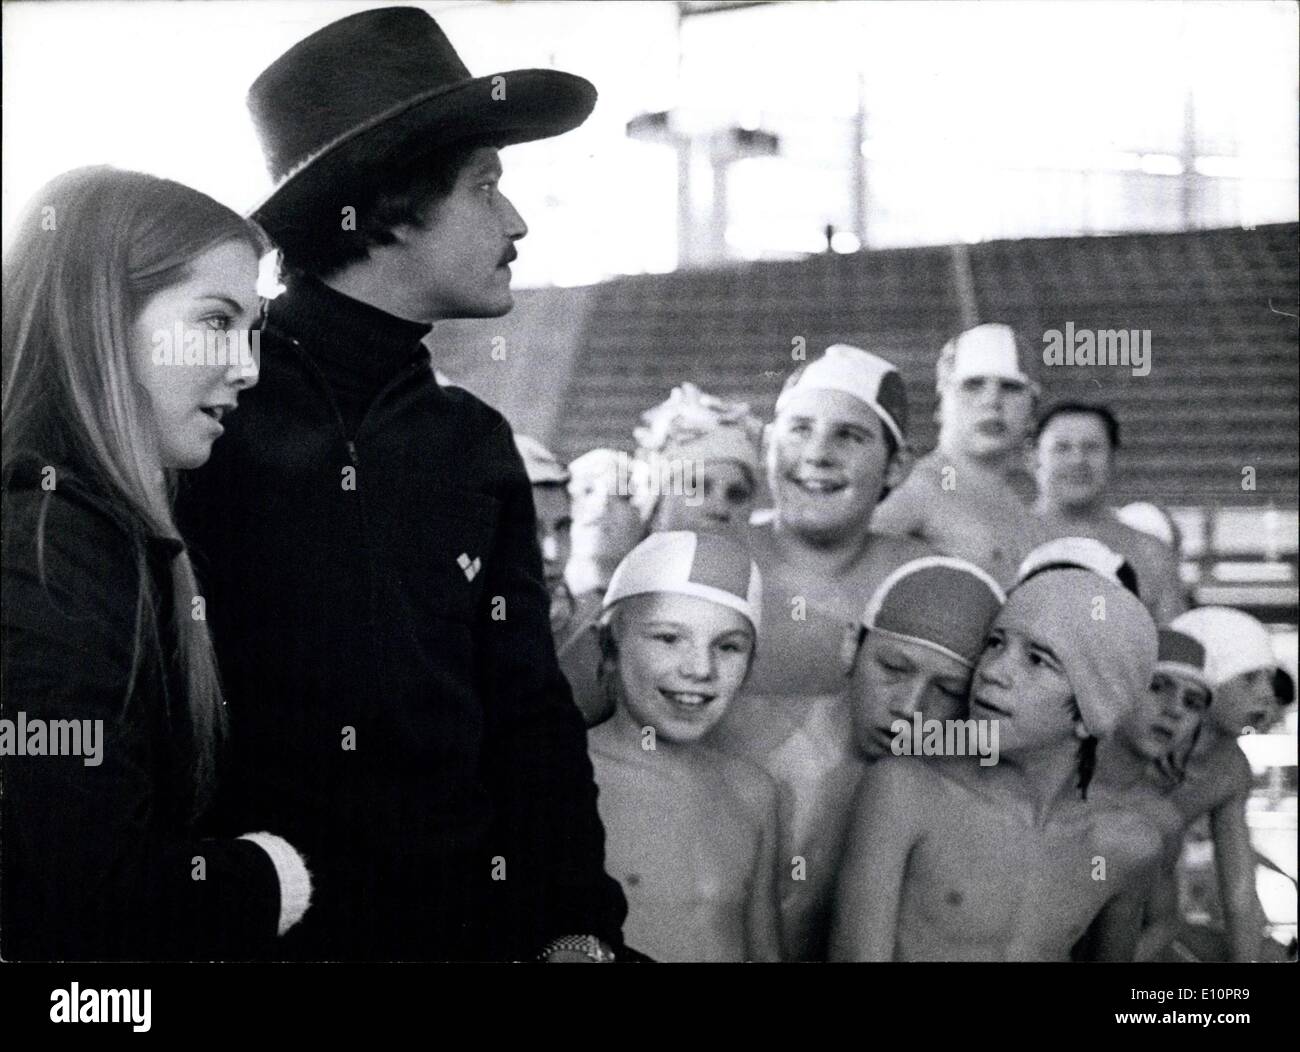 Nov. 21, 1973 - Famous Swimming Athlete Mark Spitz pays visit to Munich One year after the Olympic Games - The Phenomenul Winner of Seven Gold Medals Cams now to visit Munich and the Olympic site of his great triumph again. This time, however, he was accompanied by his pretty wife whom he showed around making her familiar with the Olympic sute - Mr. and Mrs. Mark Spitz are presently on a PR Tour through Europe to propagate a pair of Swimming trunks which were invented by Mark Spitz himself. Their stay in the Bavarian Capital, though, was strictly a privateone. OPS: Mr and Mrs Stock Photo